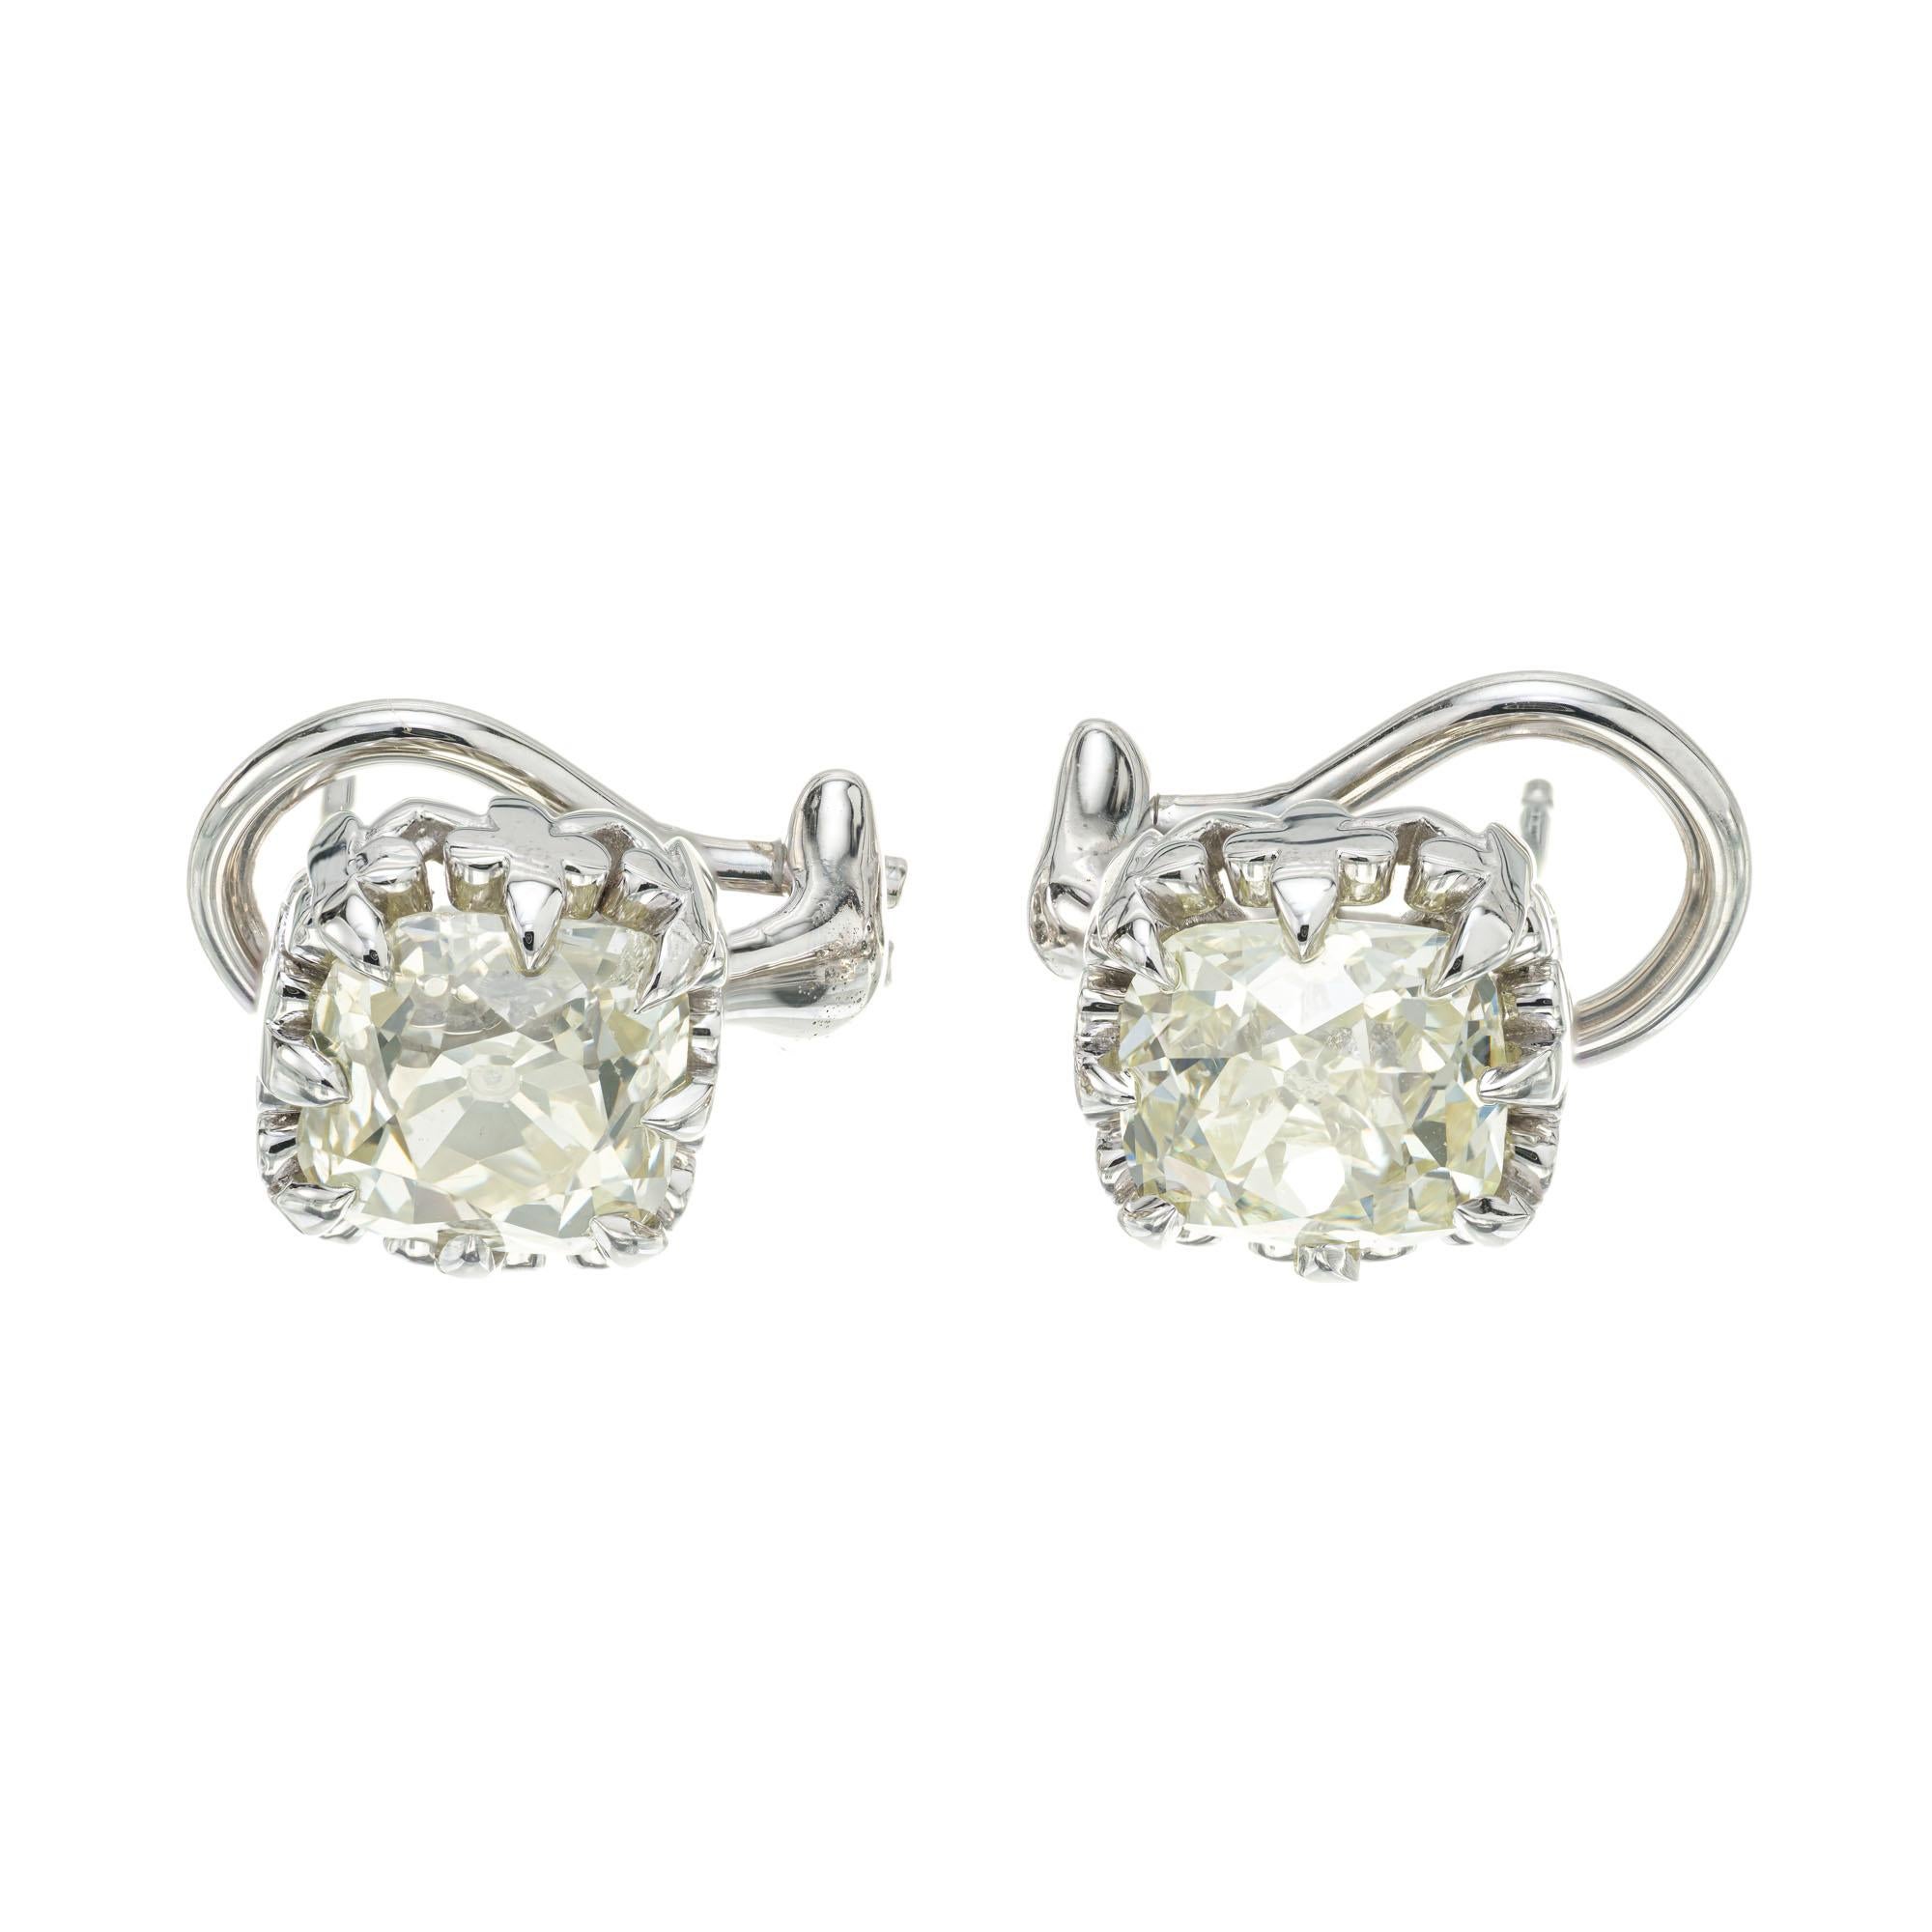 Peter Suchy antique inspired platinum diamond stud earrings with a low set scroll design top that is a copy of a 1900’s hand made earring. Set with two EGL certified old mine brilliant cut diamonds. The post is platinum, and the clip backs are 18k